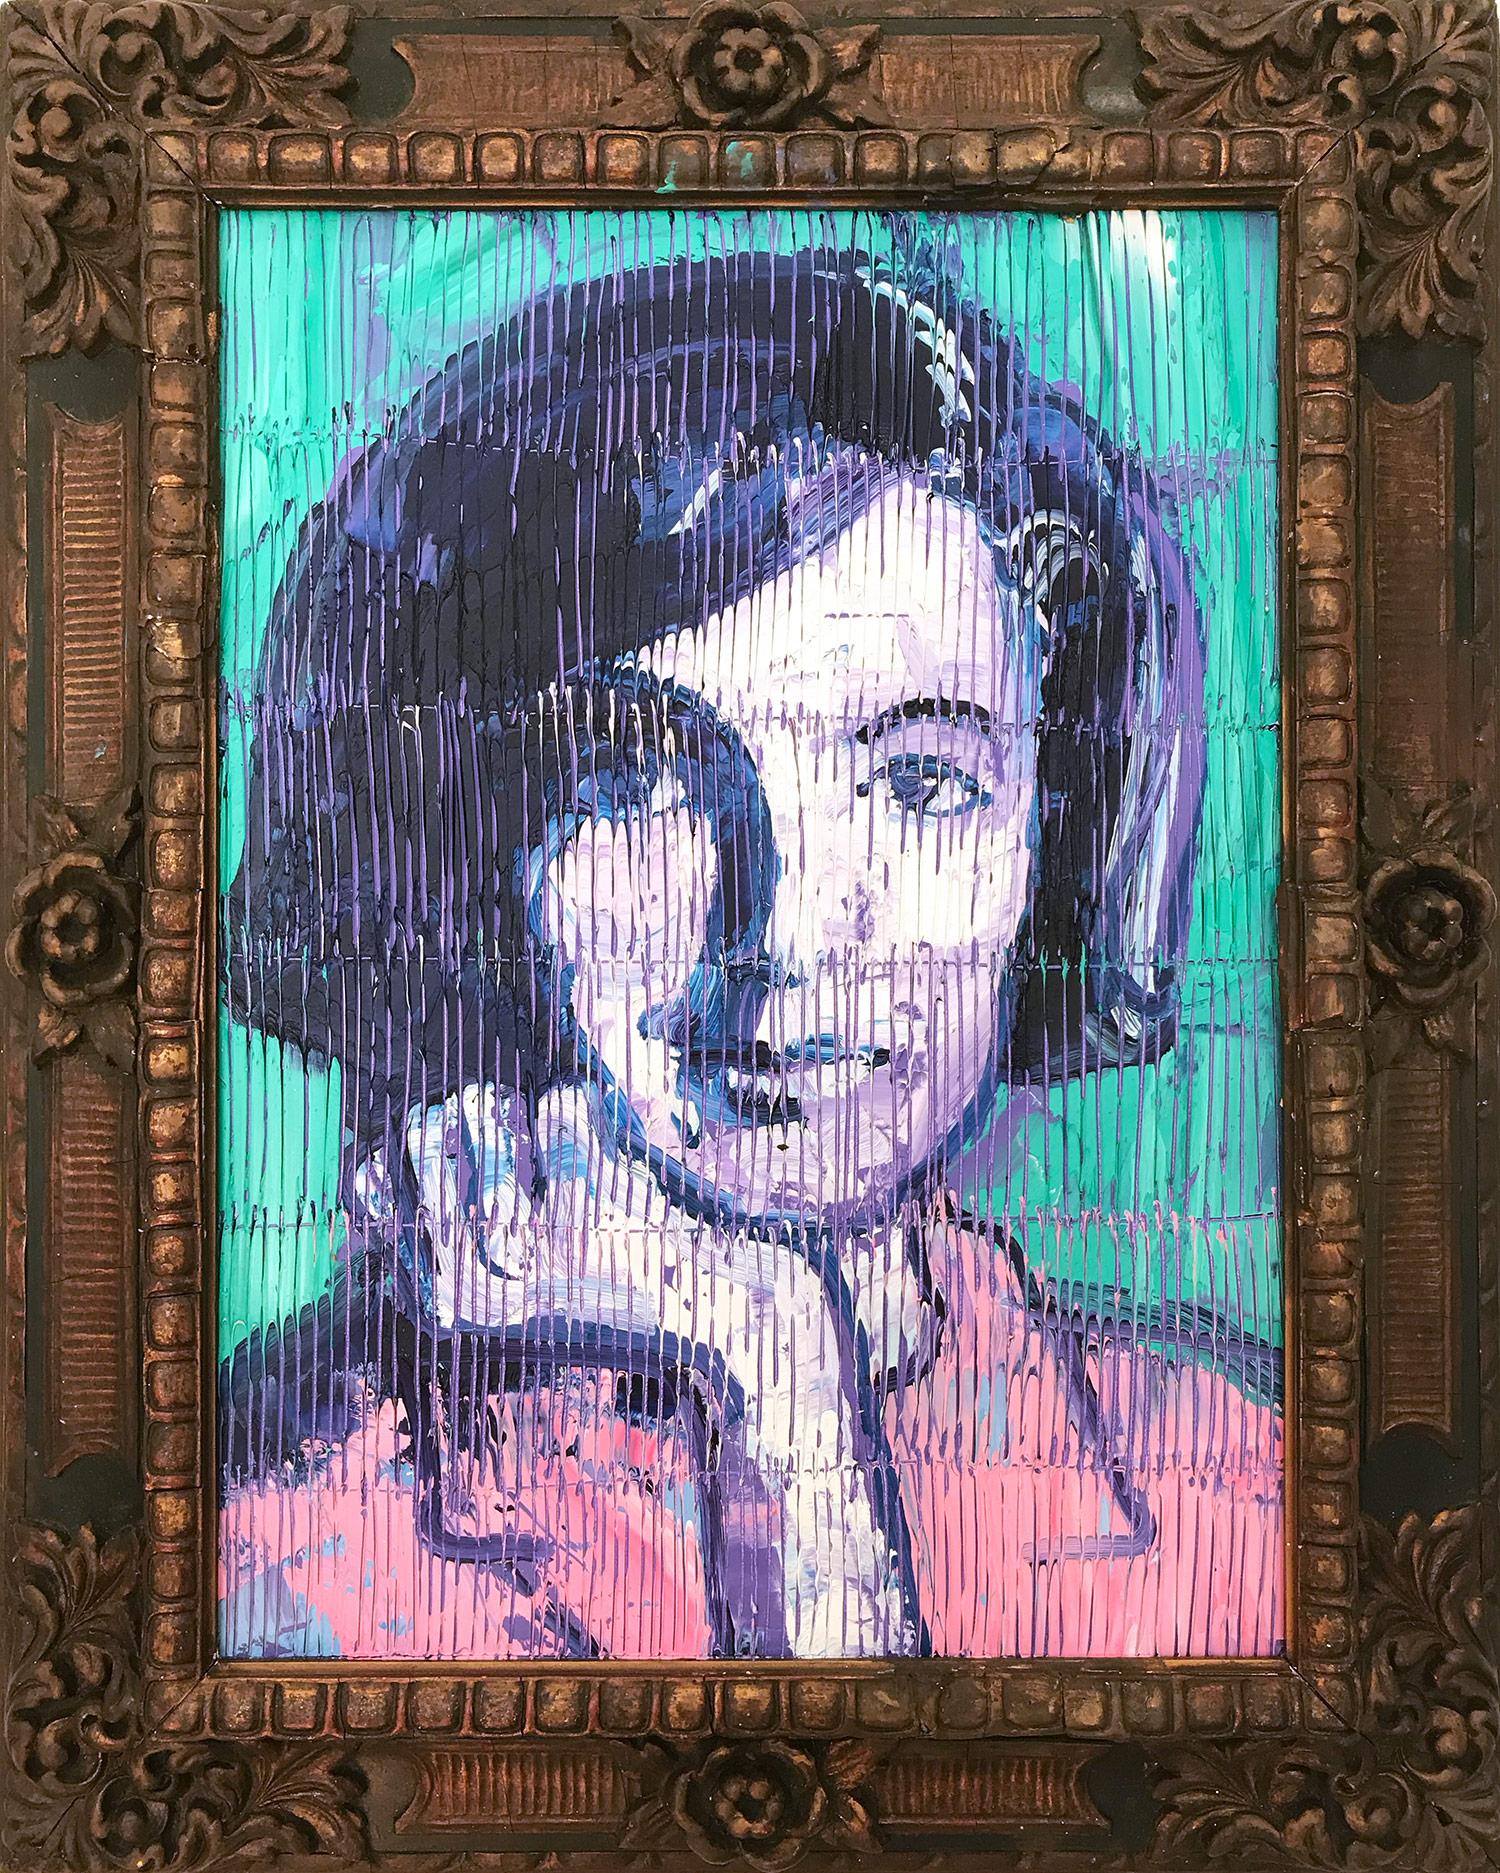 Hunt Slonem Portrait Painting - "Jackie Kennedy" Neo-Expressionist Oil Painting in Turquoise Background on Wood